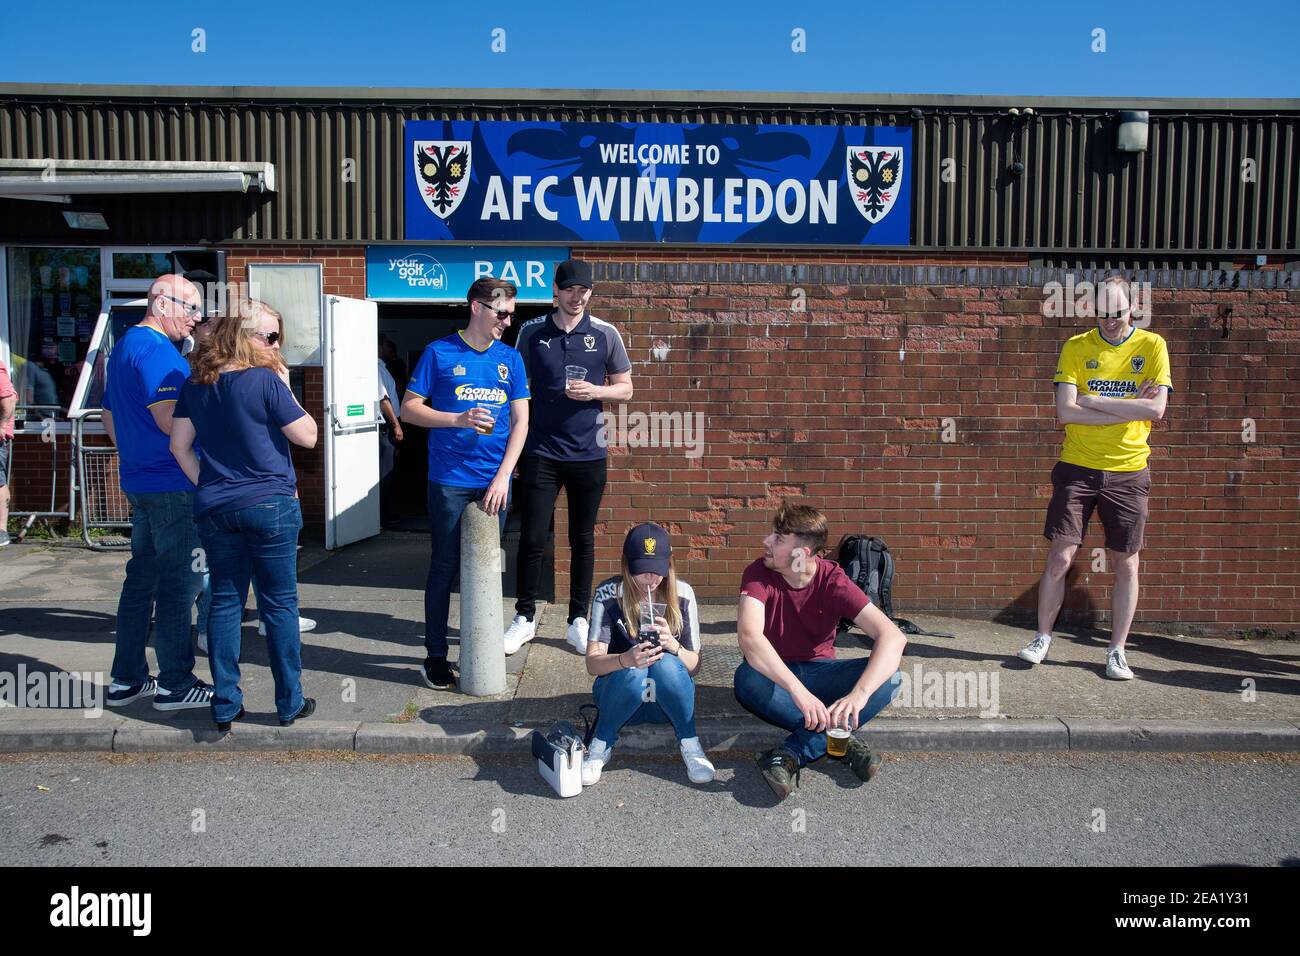 Football supporters waiting in front of AFC Wimbledon football club, England. Stock Photo